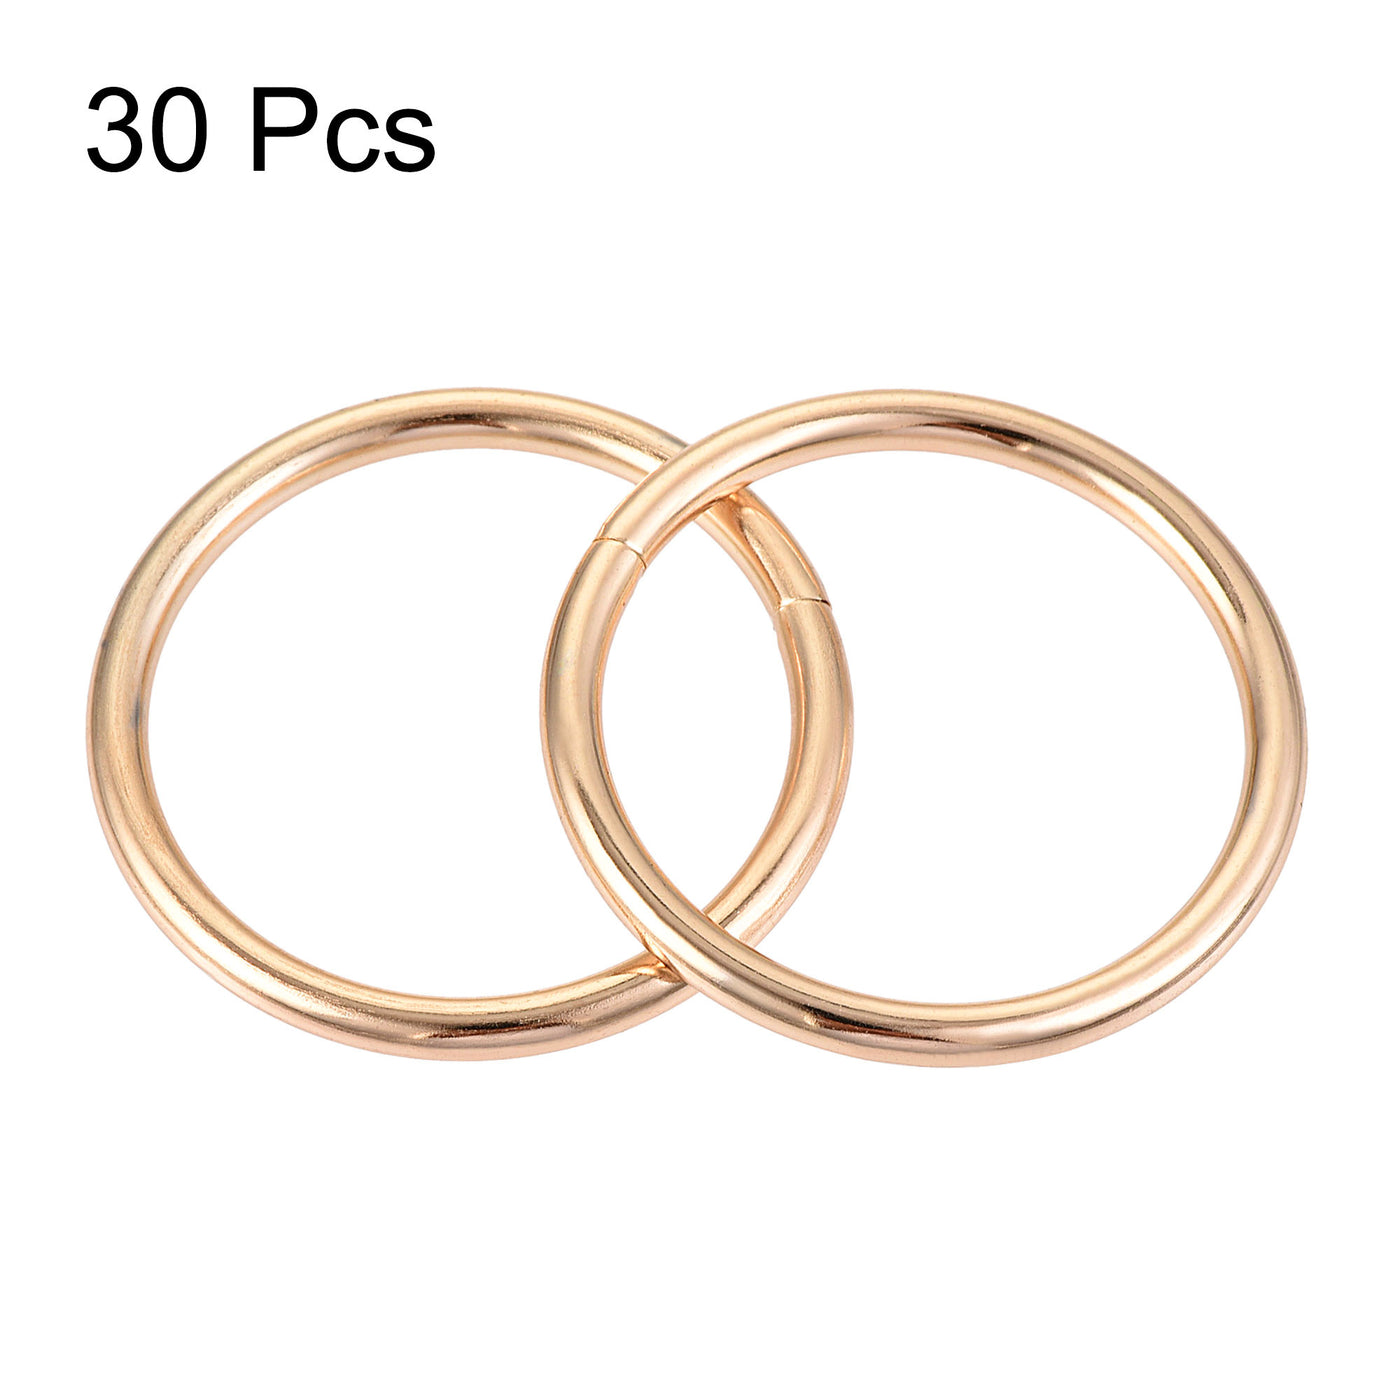 uxcell Uxcell 30mm Metal O Rings Non-Welded for Straps Bags Belts DIY Gold Tone 30pcs